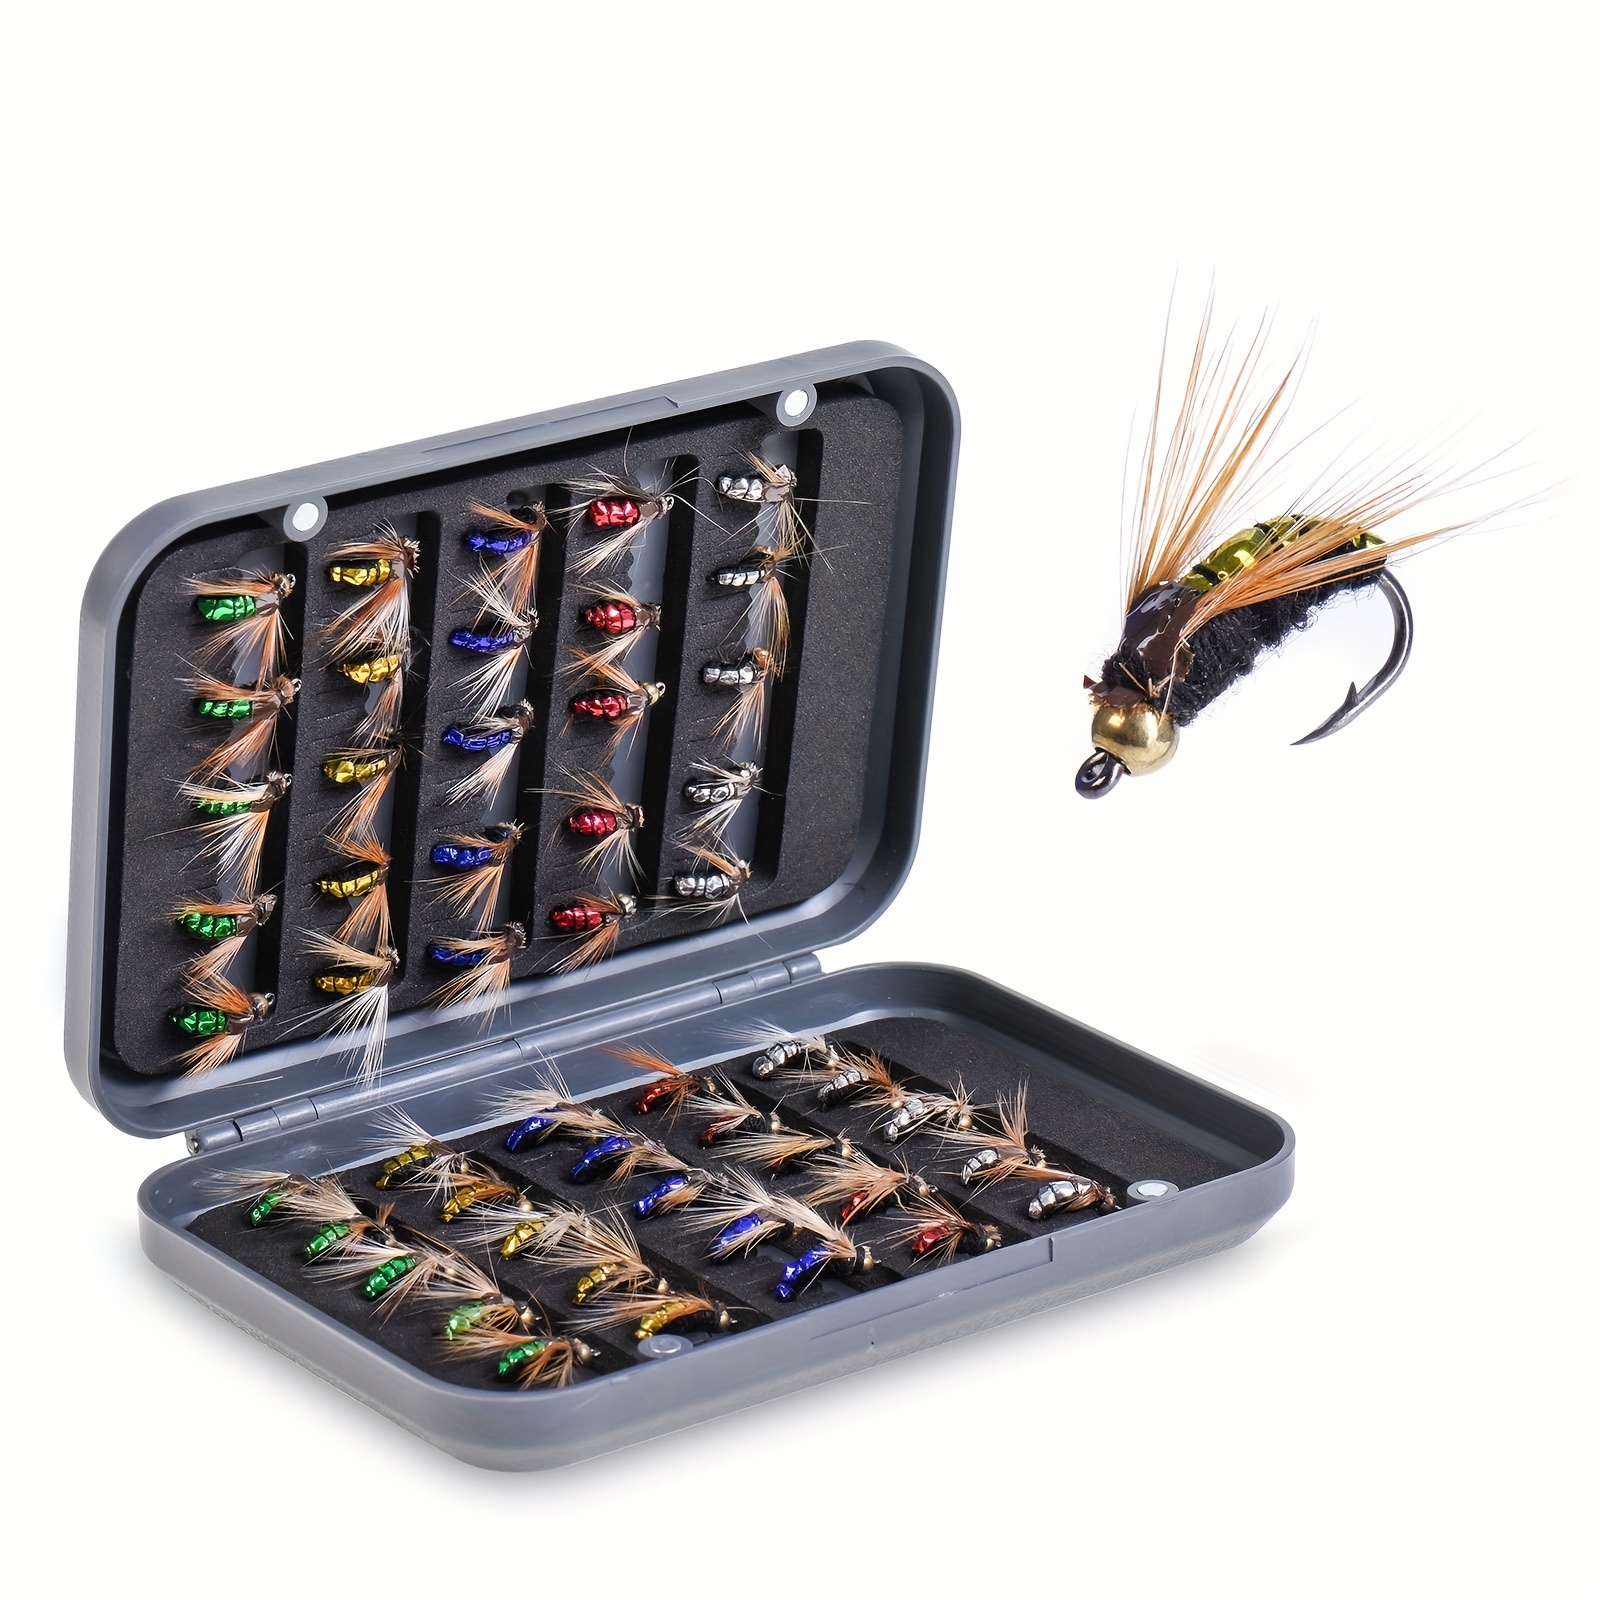 Premium Fly Fishing * Kit - 50 Hand-Tied * with Waterproof Fly Box -  Perfect for Trout, Bass, and Salmon Fishing